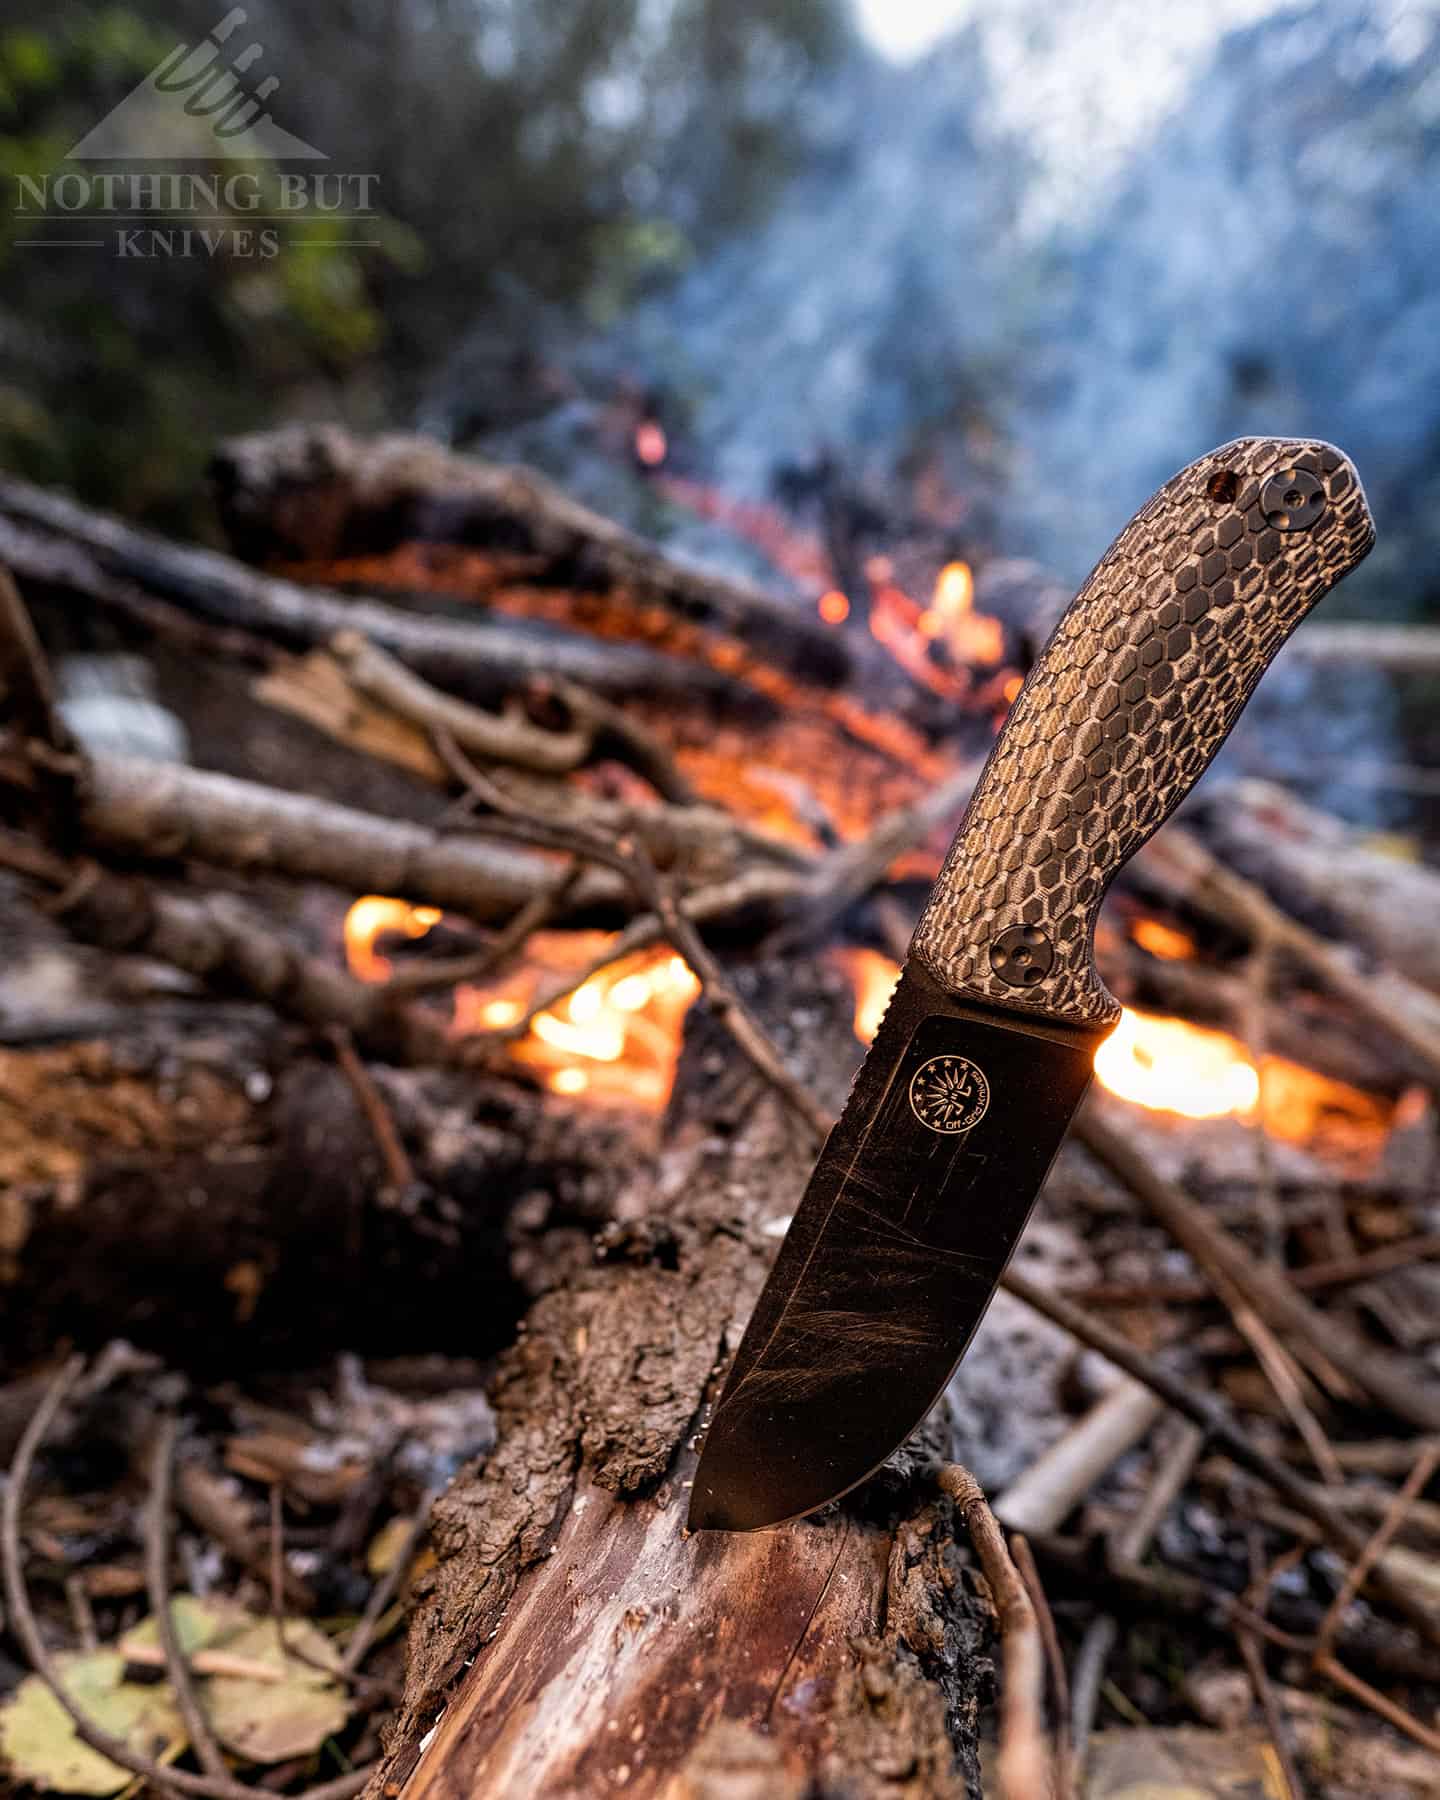 The Off-Grid Tracker-X bushcraft knife is a good alternative to the Ridgeback if you like thick handles.